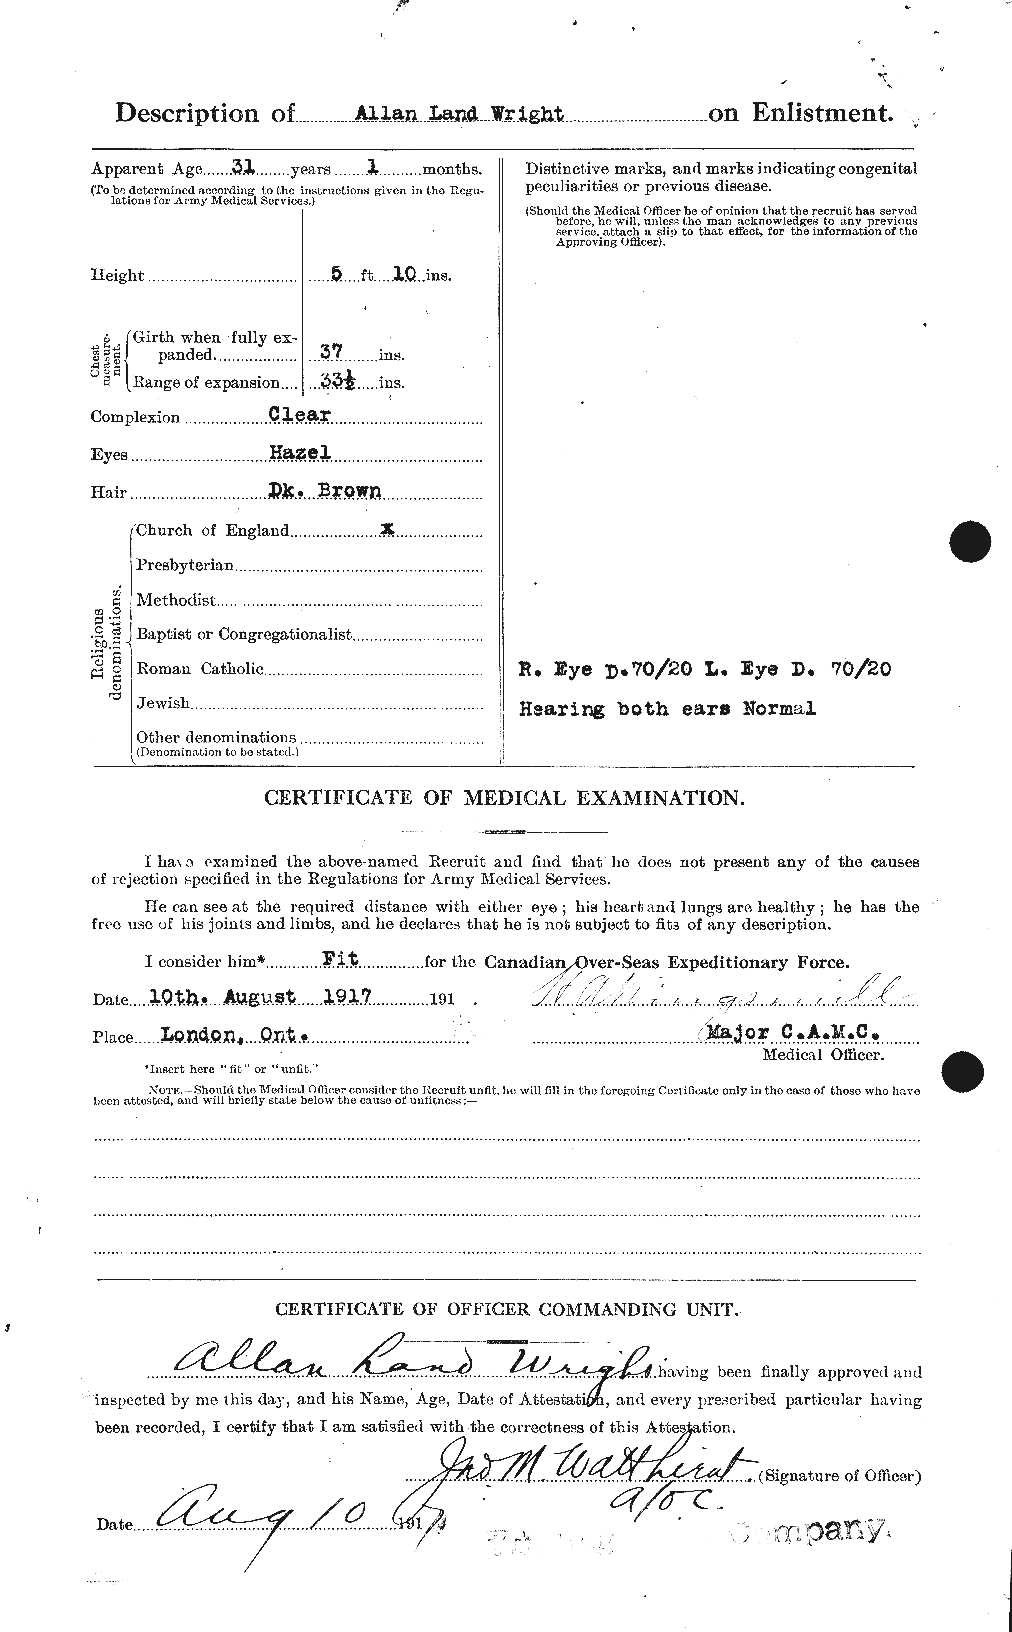 Personnel Records of the First World War - CEF 688134b